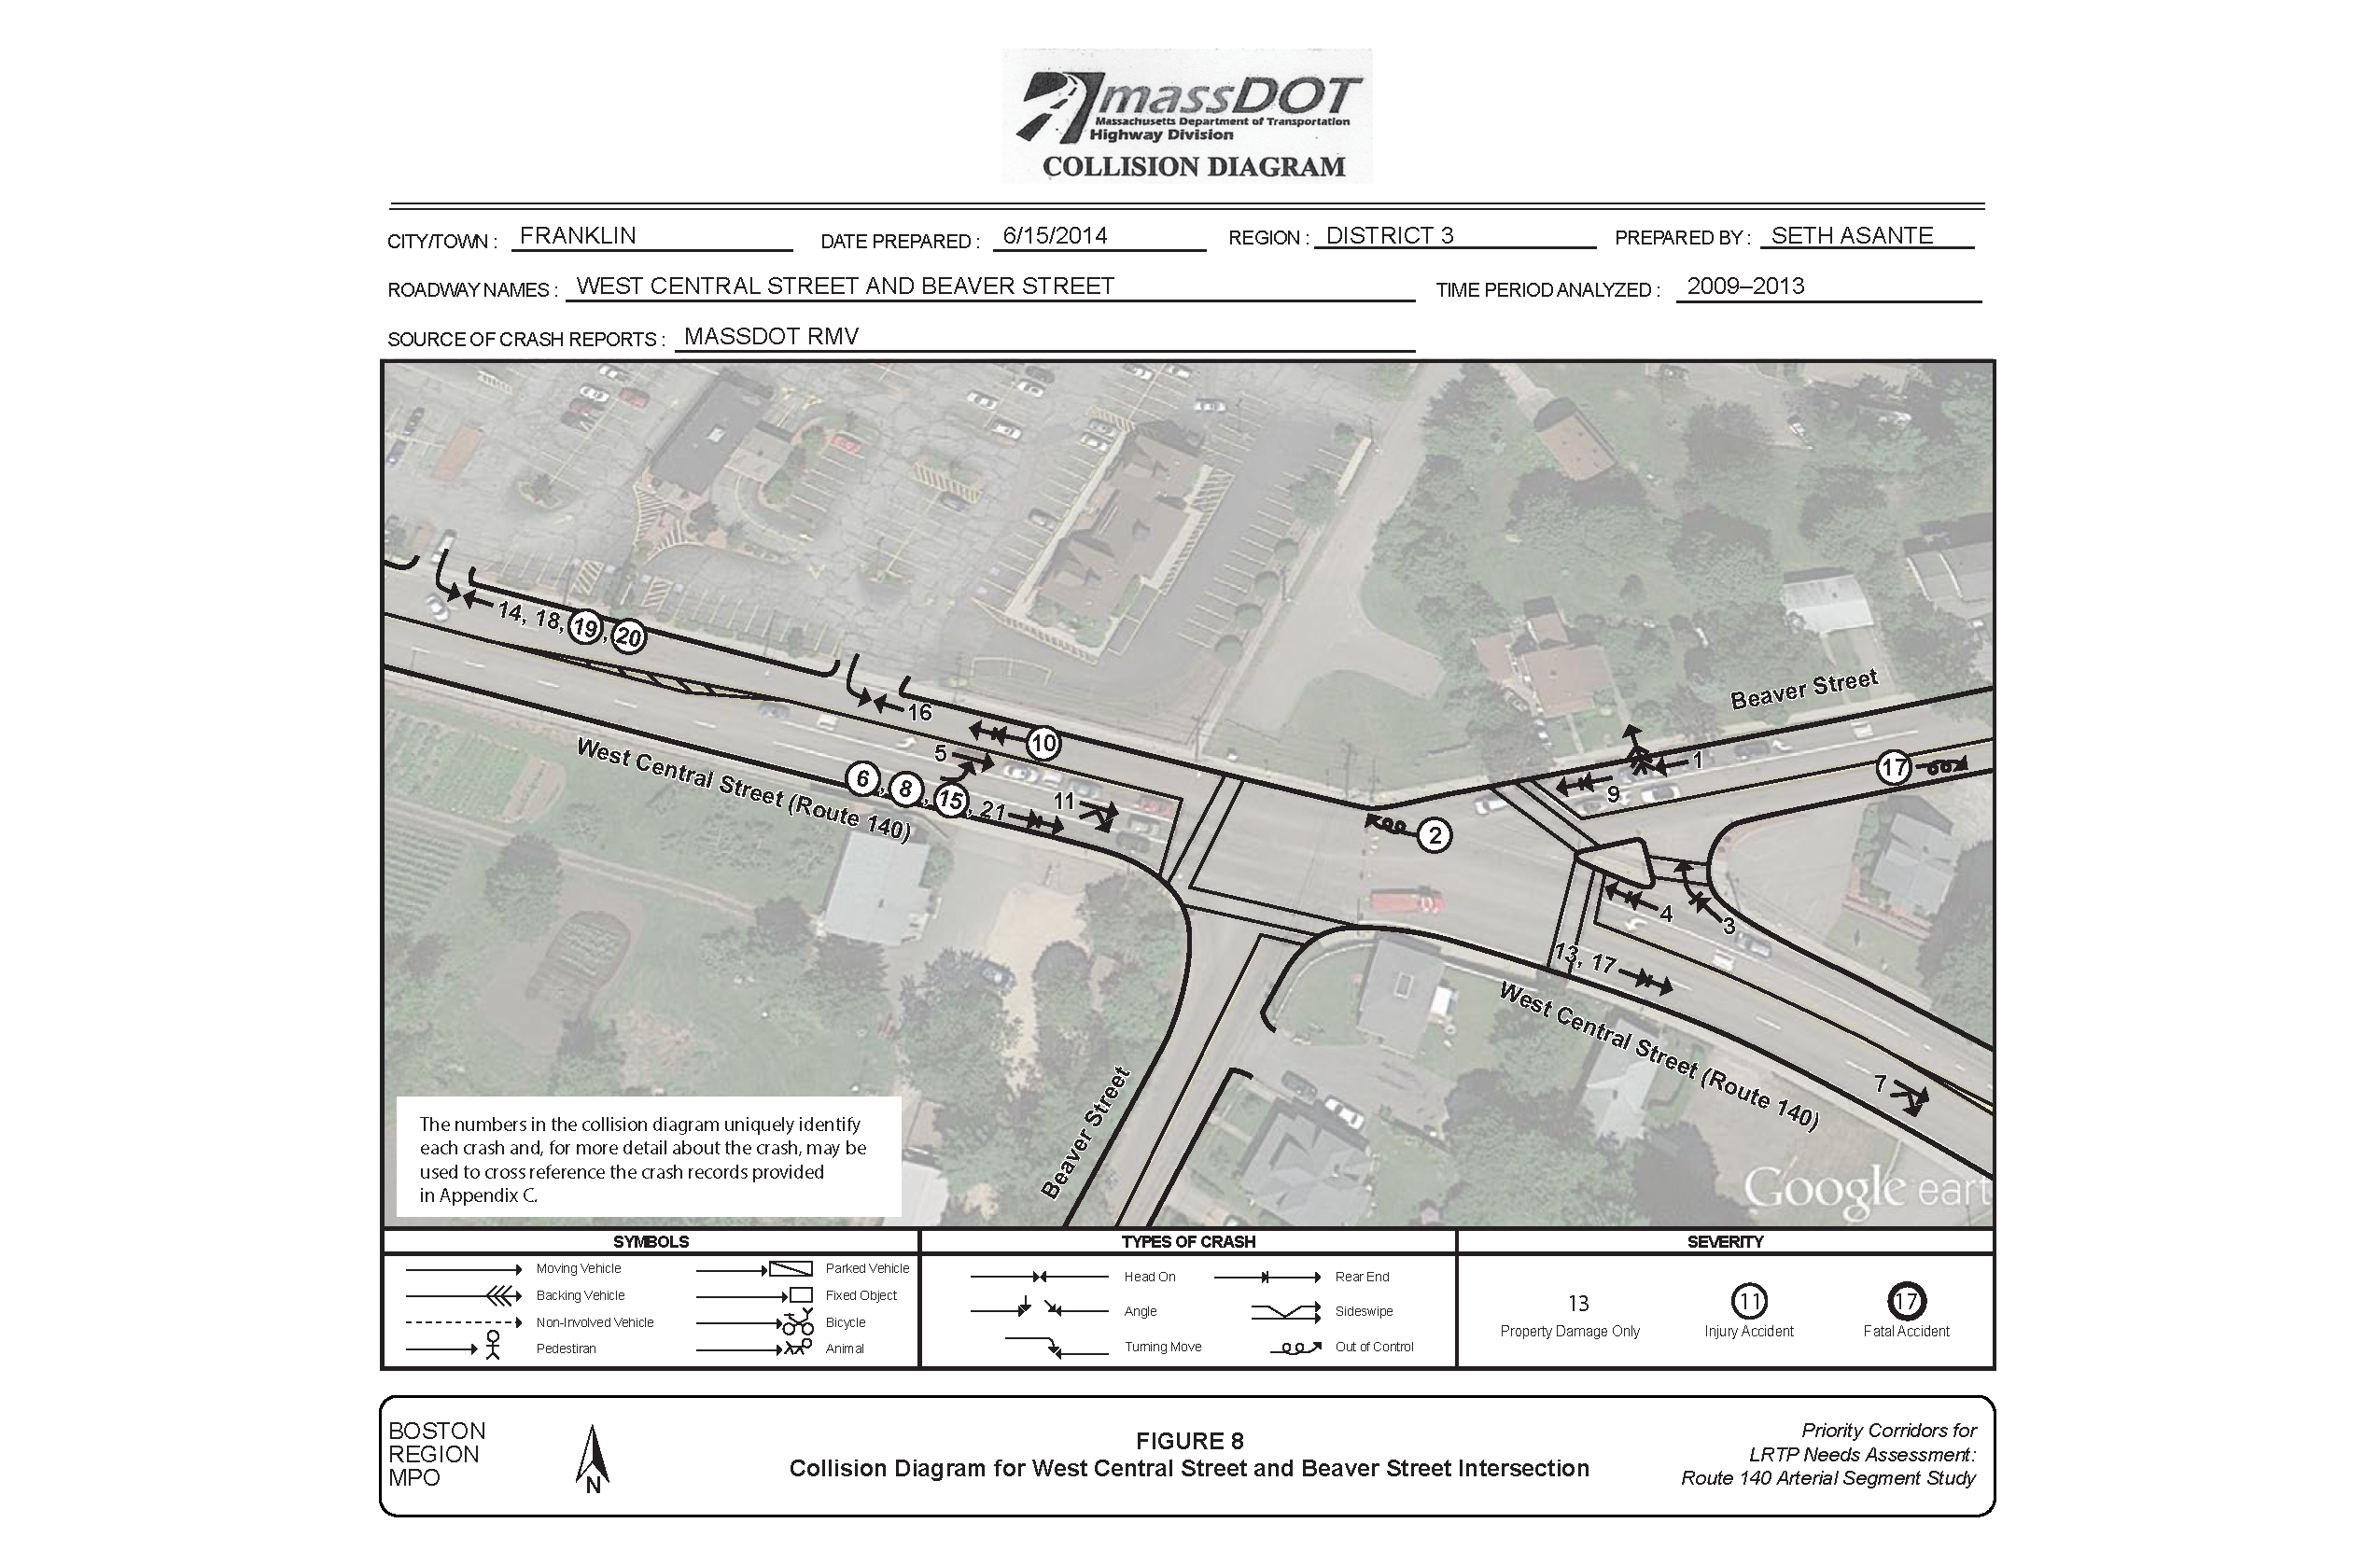 FIGURE 8: Collision Diagram for West Central Street and Beaver Street Intersection. Aerial-view map that shows location and type of crashes at the West Central Street and Beaver Street intersection between 2009 and 2013.